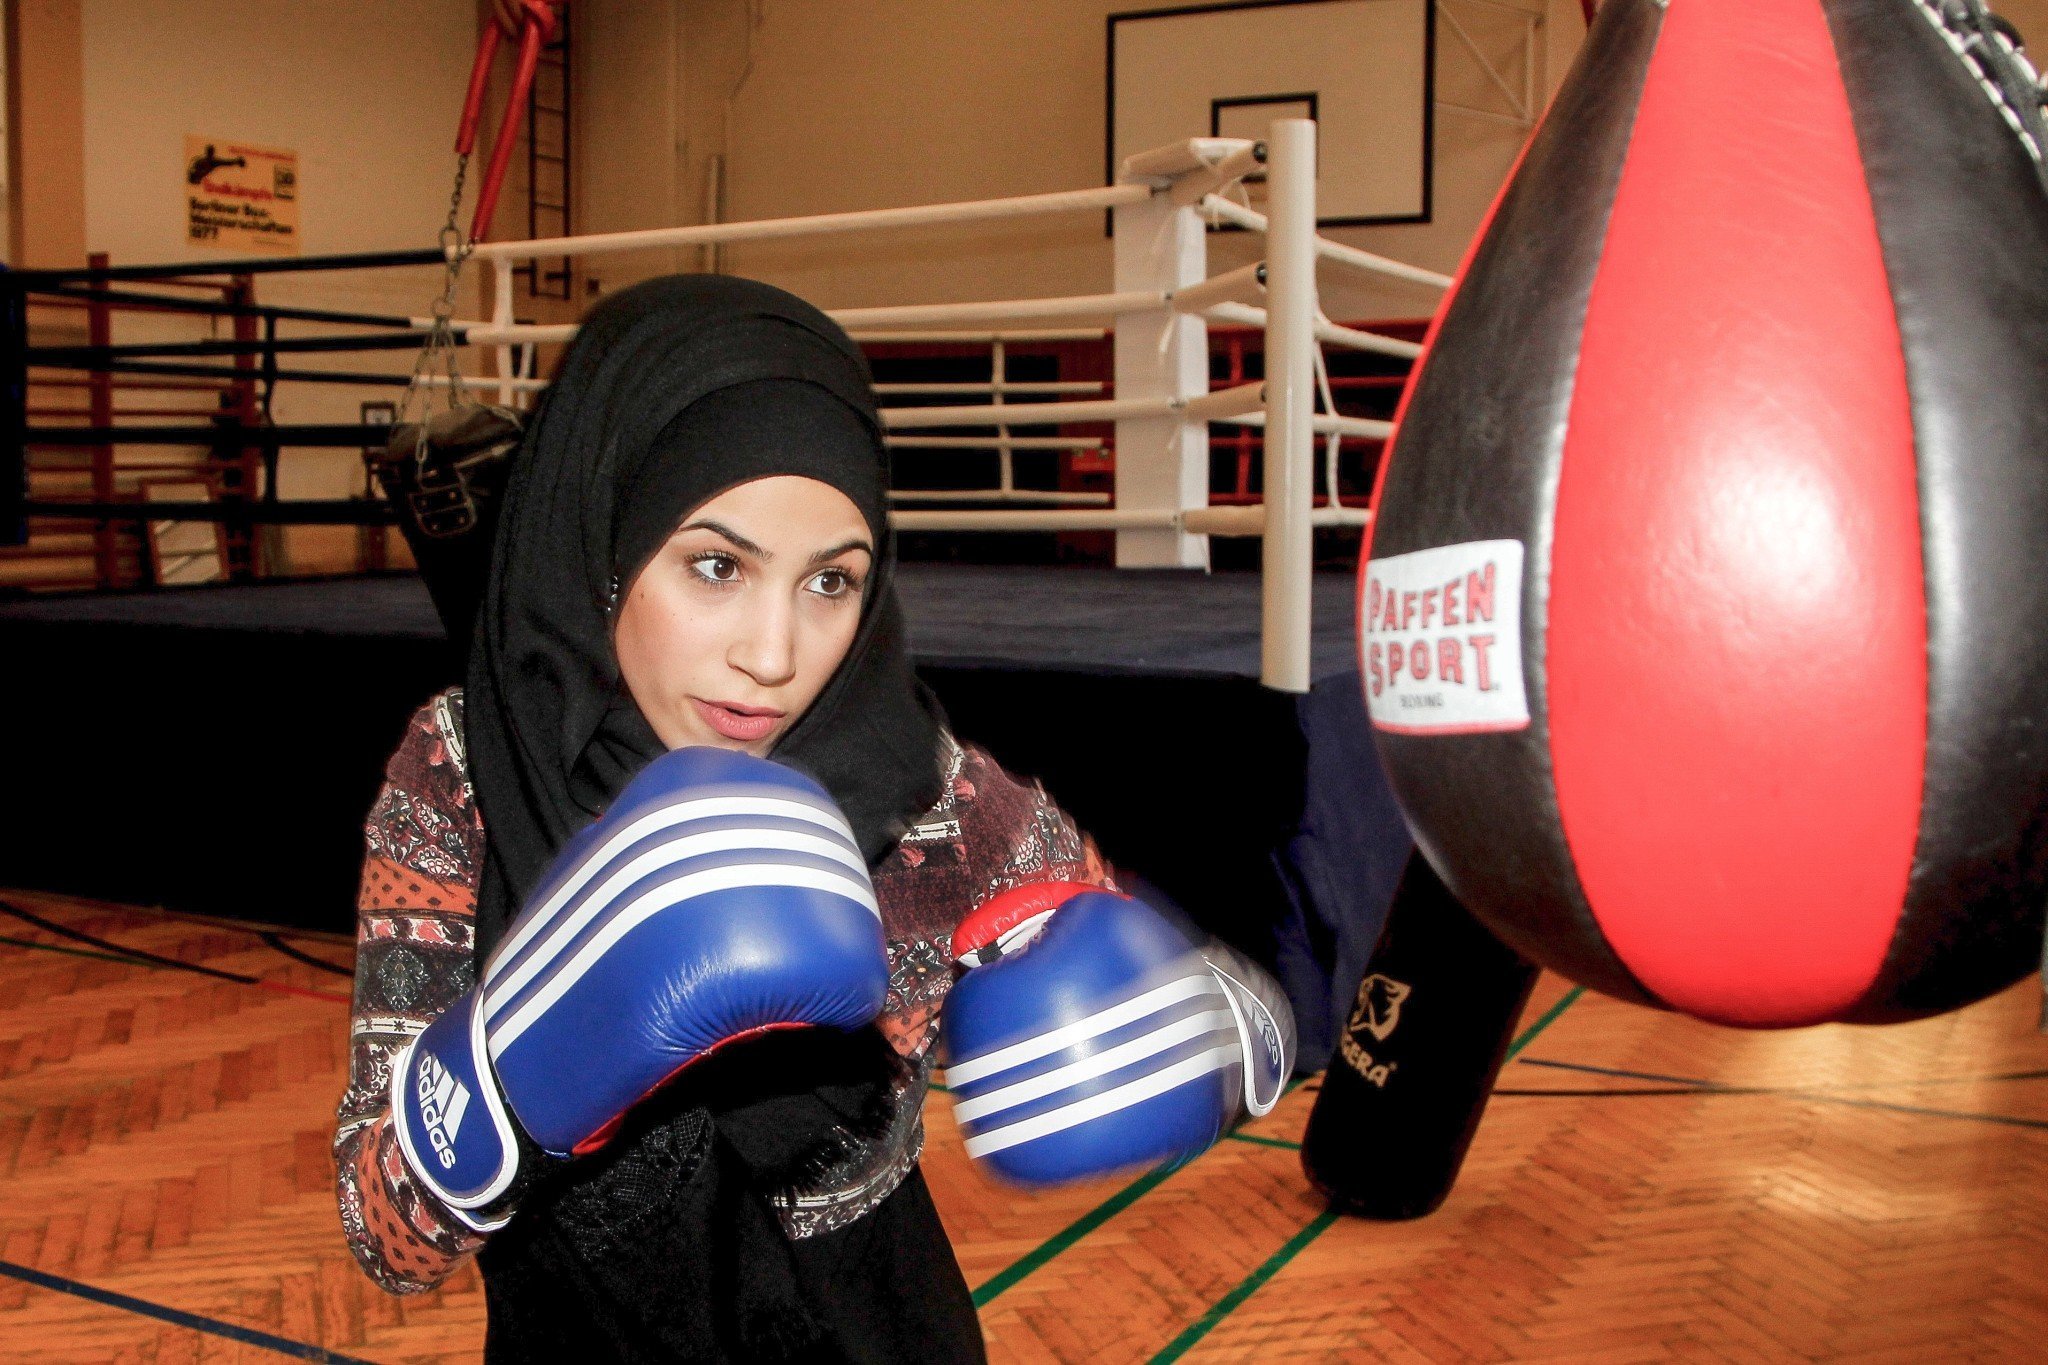 Amateur Female Boxers Can Now Wear Hijabs And Head Coverings HuffPost Women